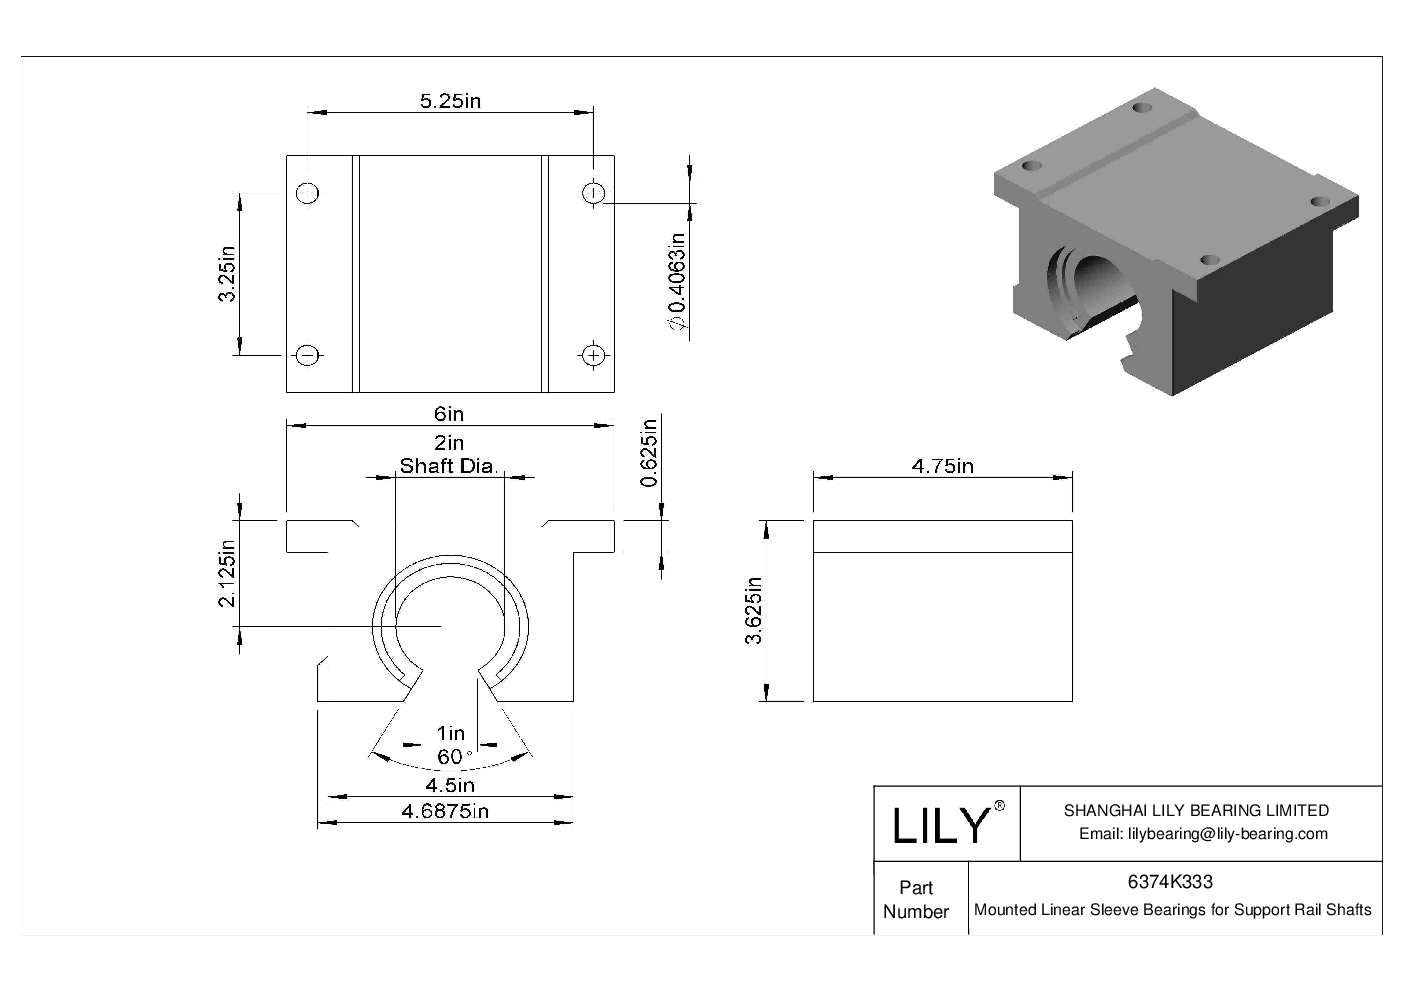 GDHEKDDD Common Mounted Linear Sleeve Bearings for Support Rail Shafts cad drawing